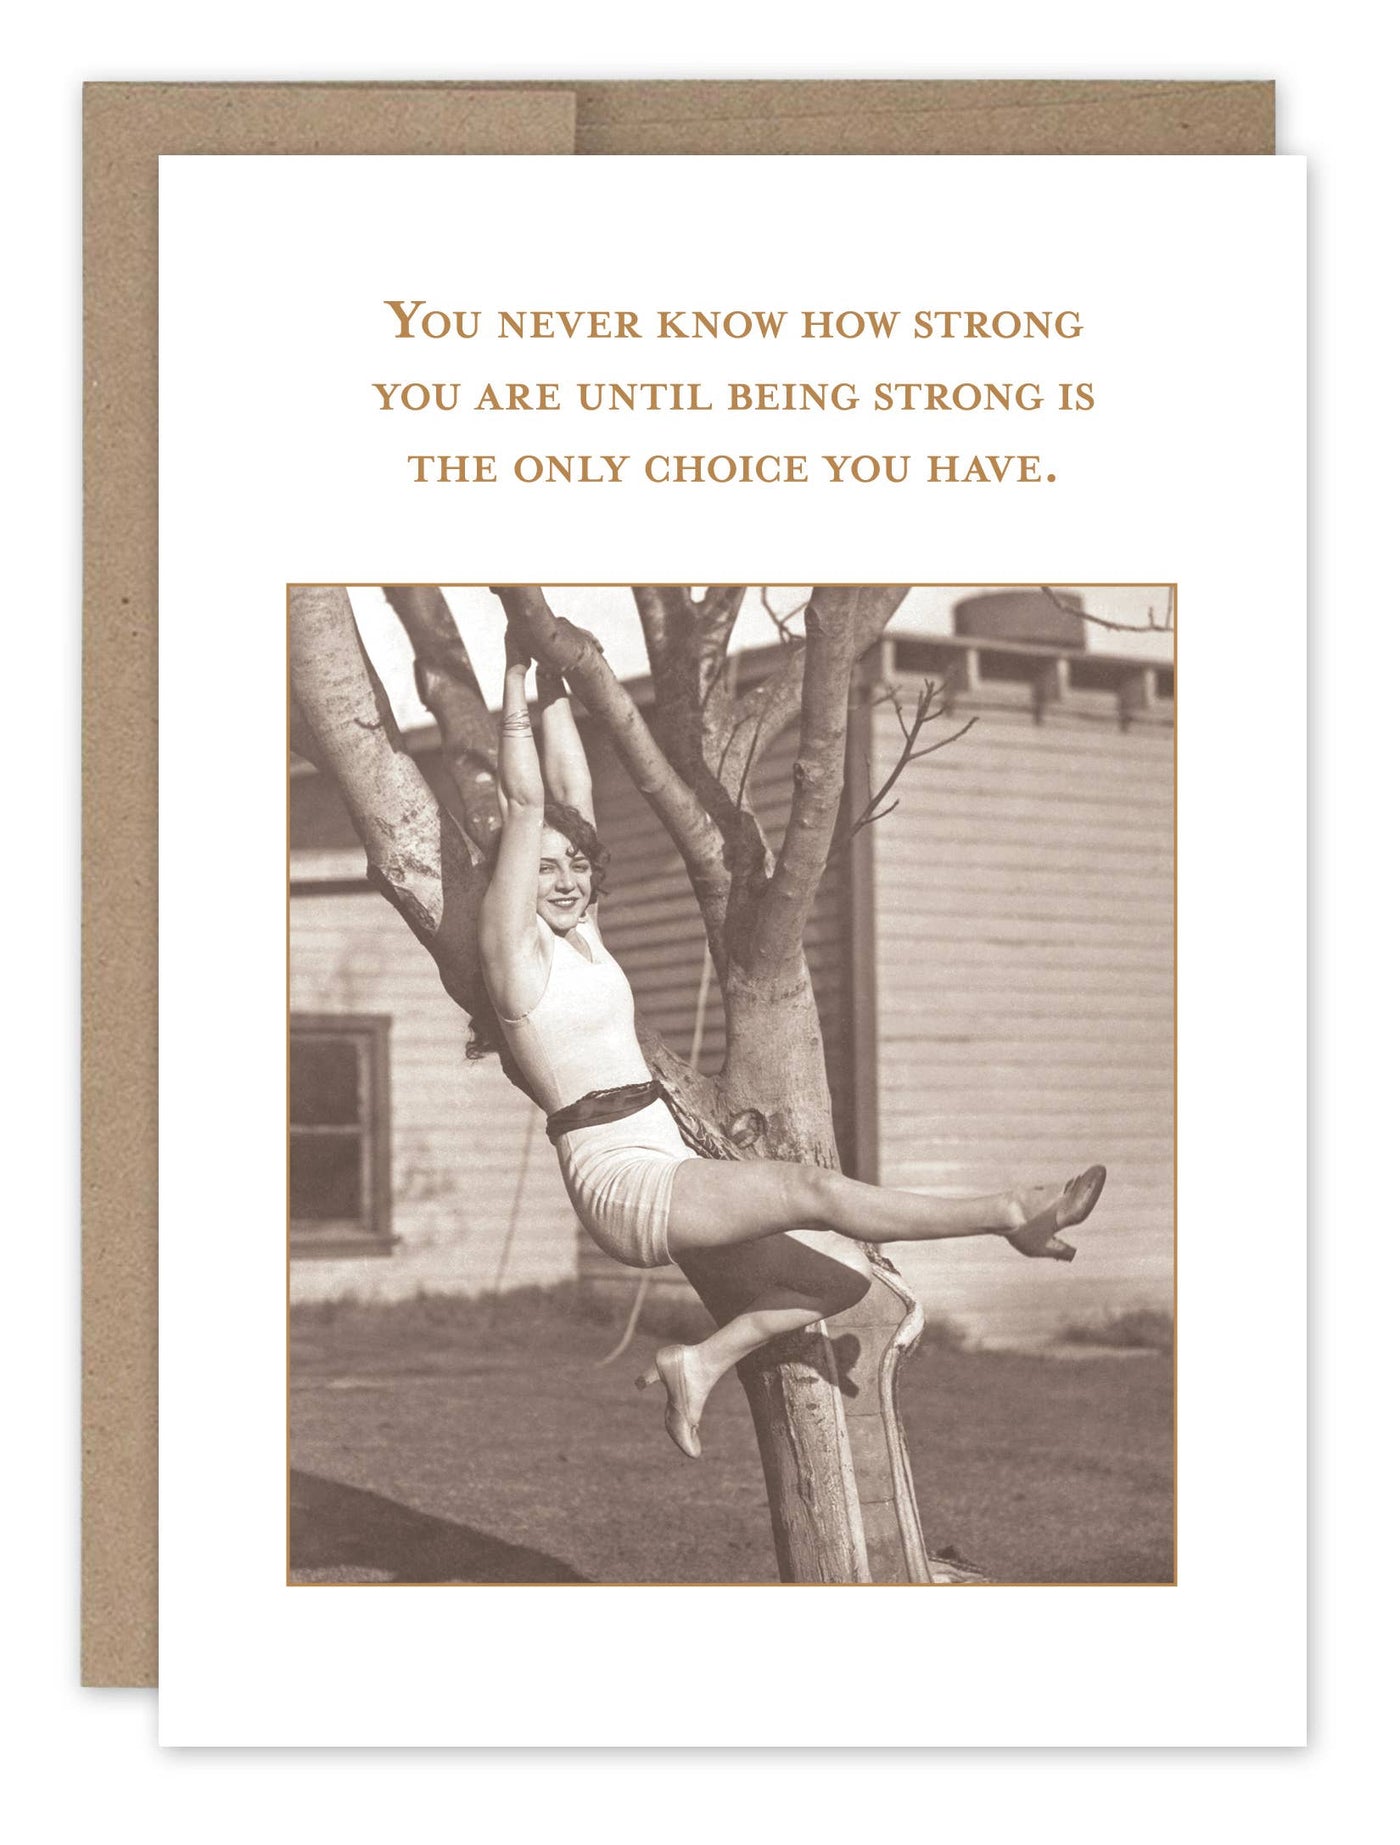 Being Strong Encouragement Card